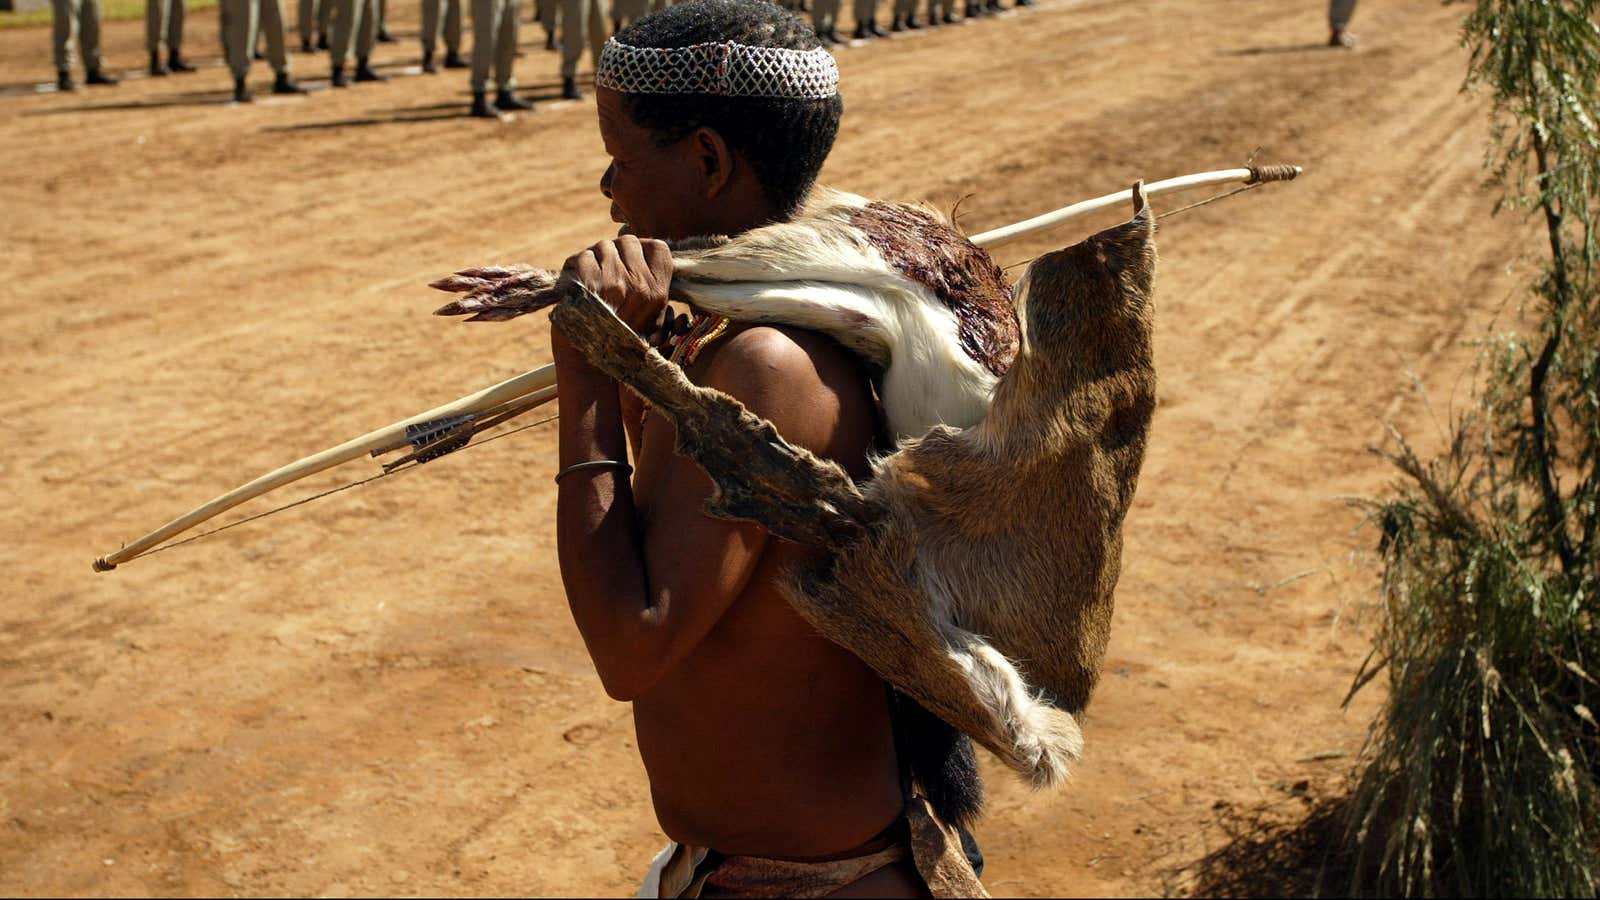 A member of the San community demonstrates ancient hunting skills.